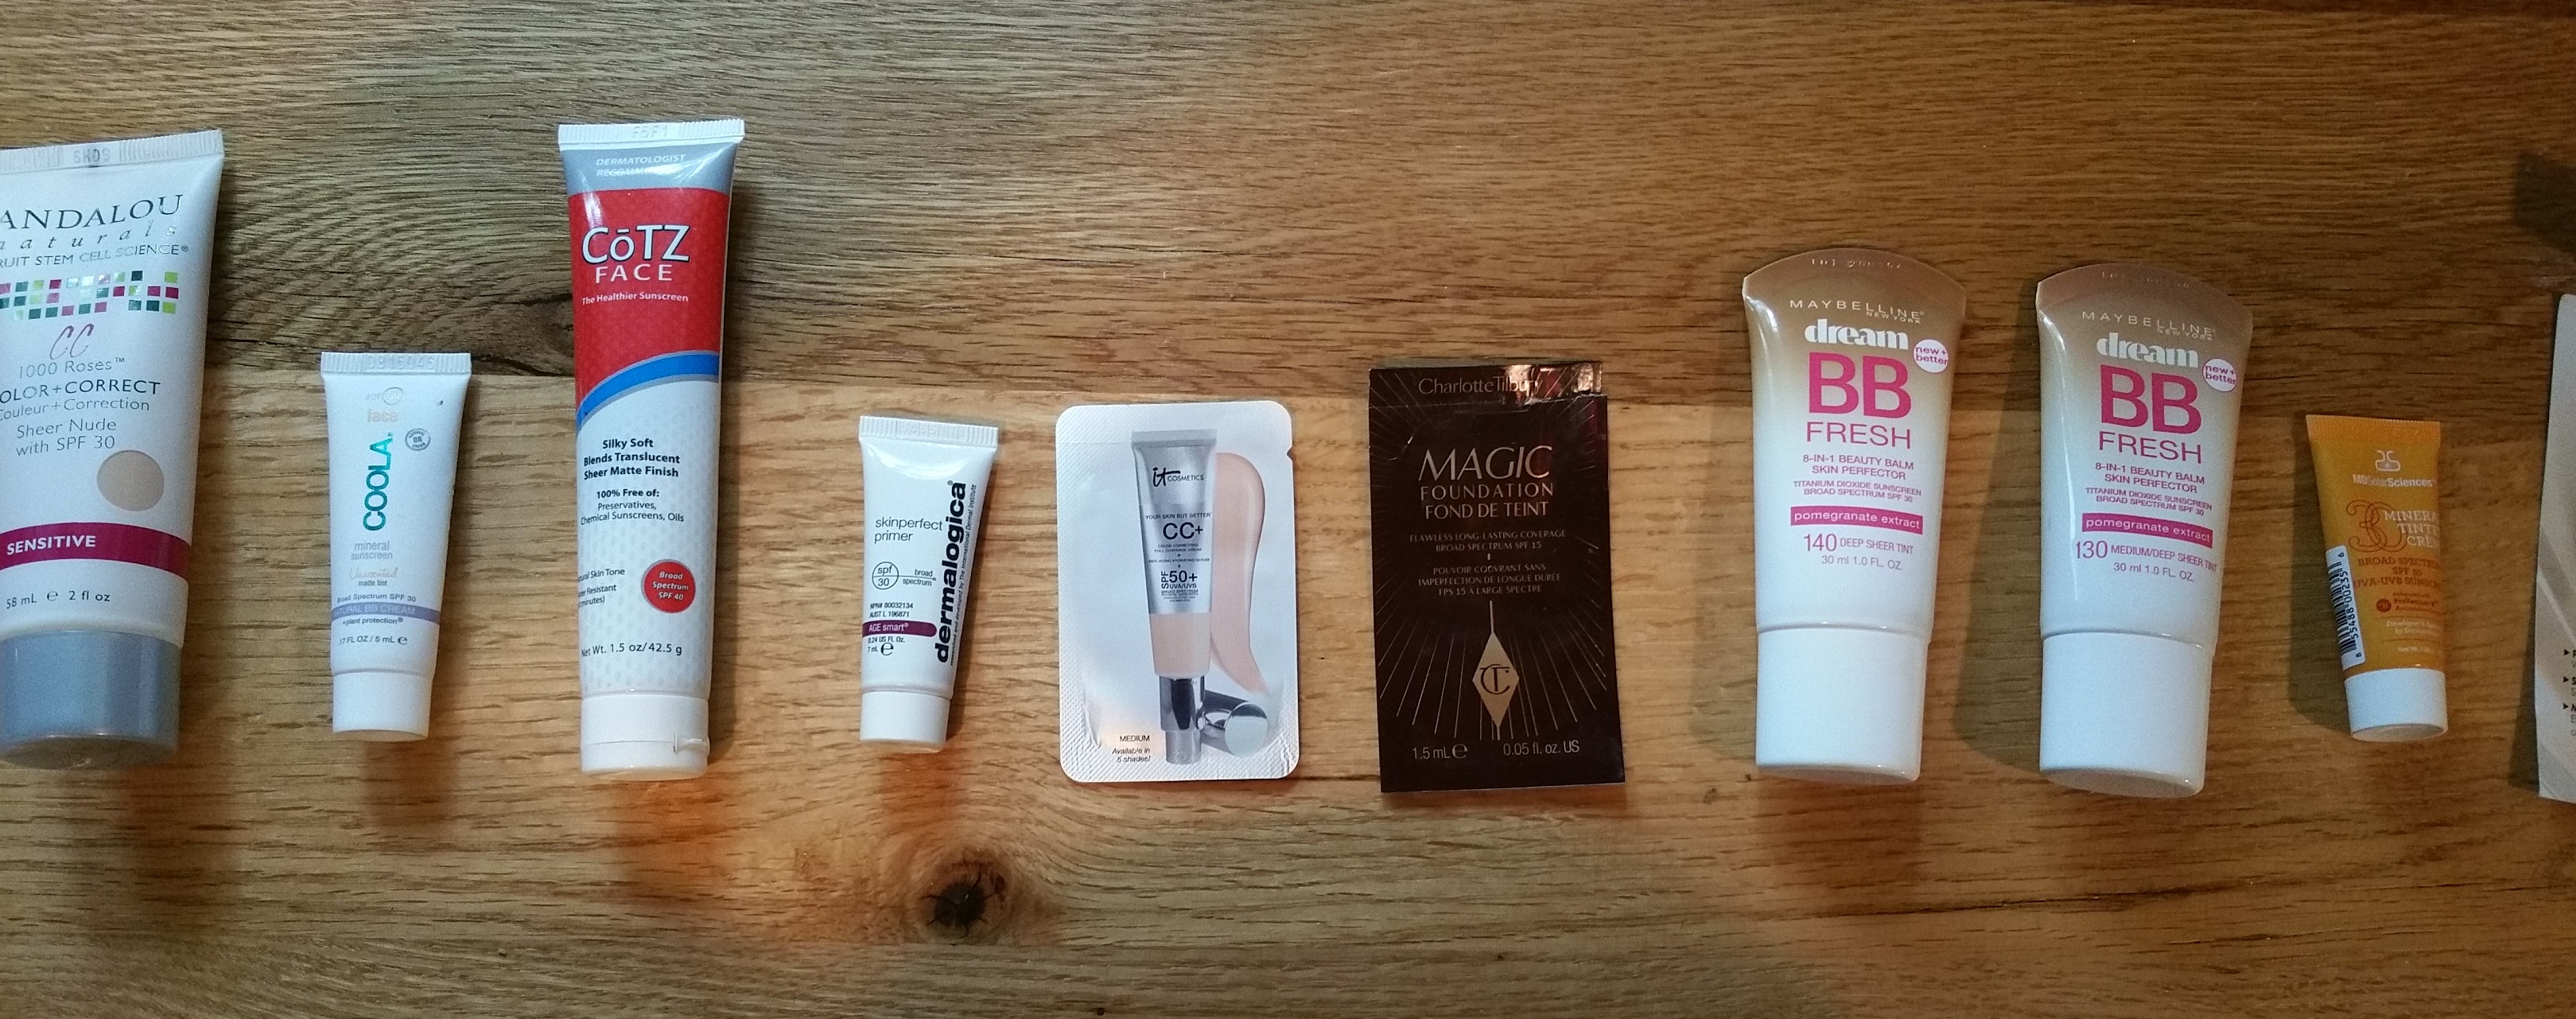 Left to right: Andalou 1000 Roses Sensitive SPF 30, Coola, Cotz, Dermalogica, It Cosmetics, Charlotte Tilbury, Maybelline BB, Maybelline BB, MDSolarsciences